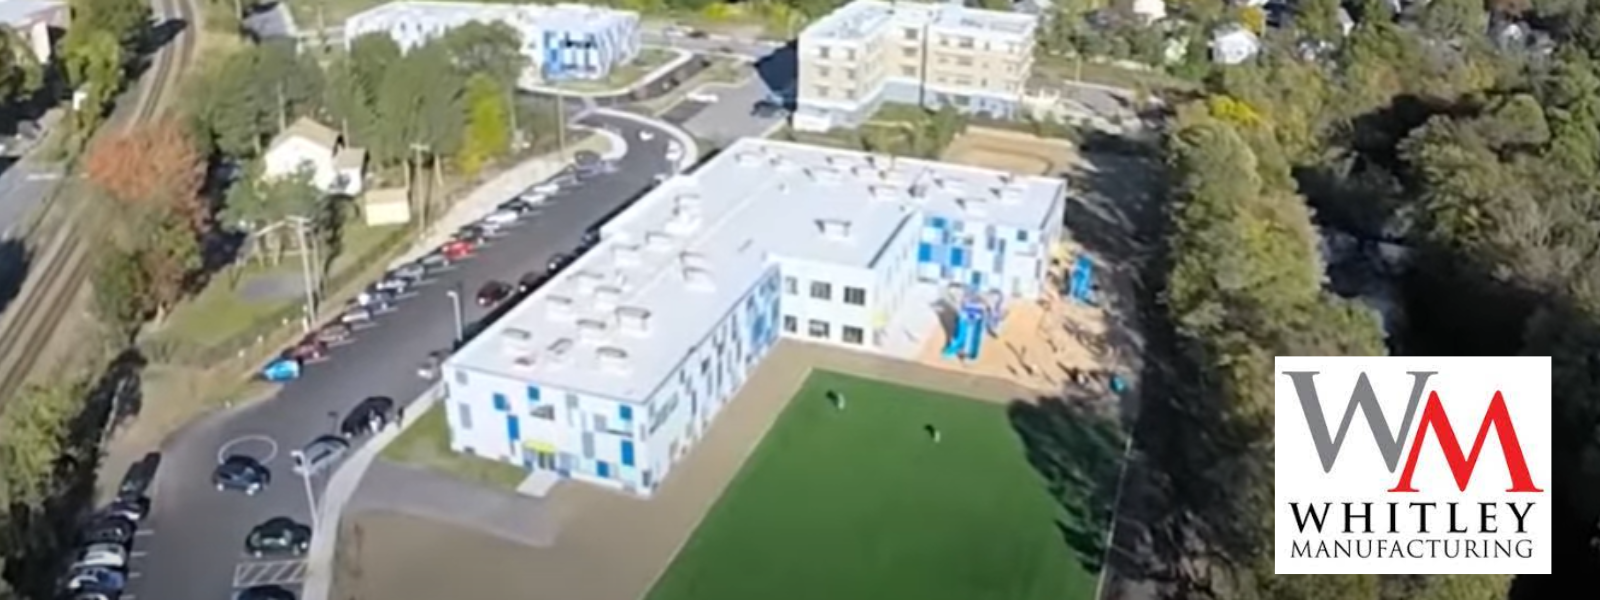 Whitley Manufacturing built this incredible Charter School.